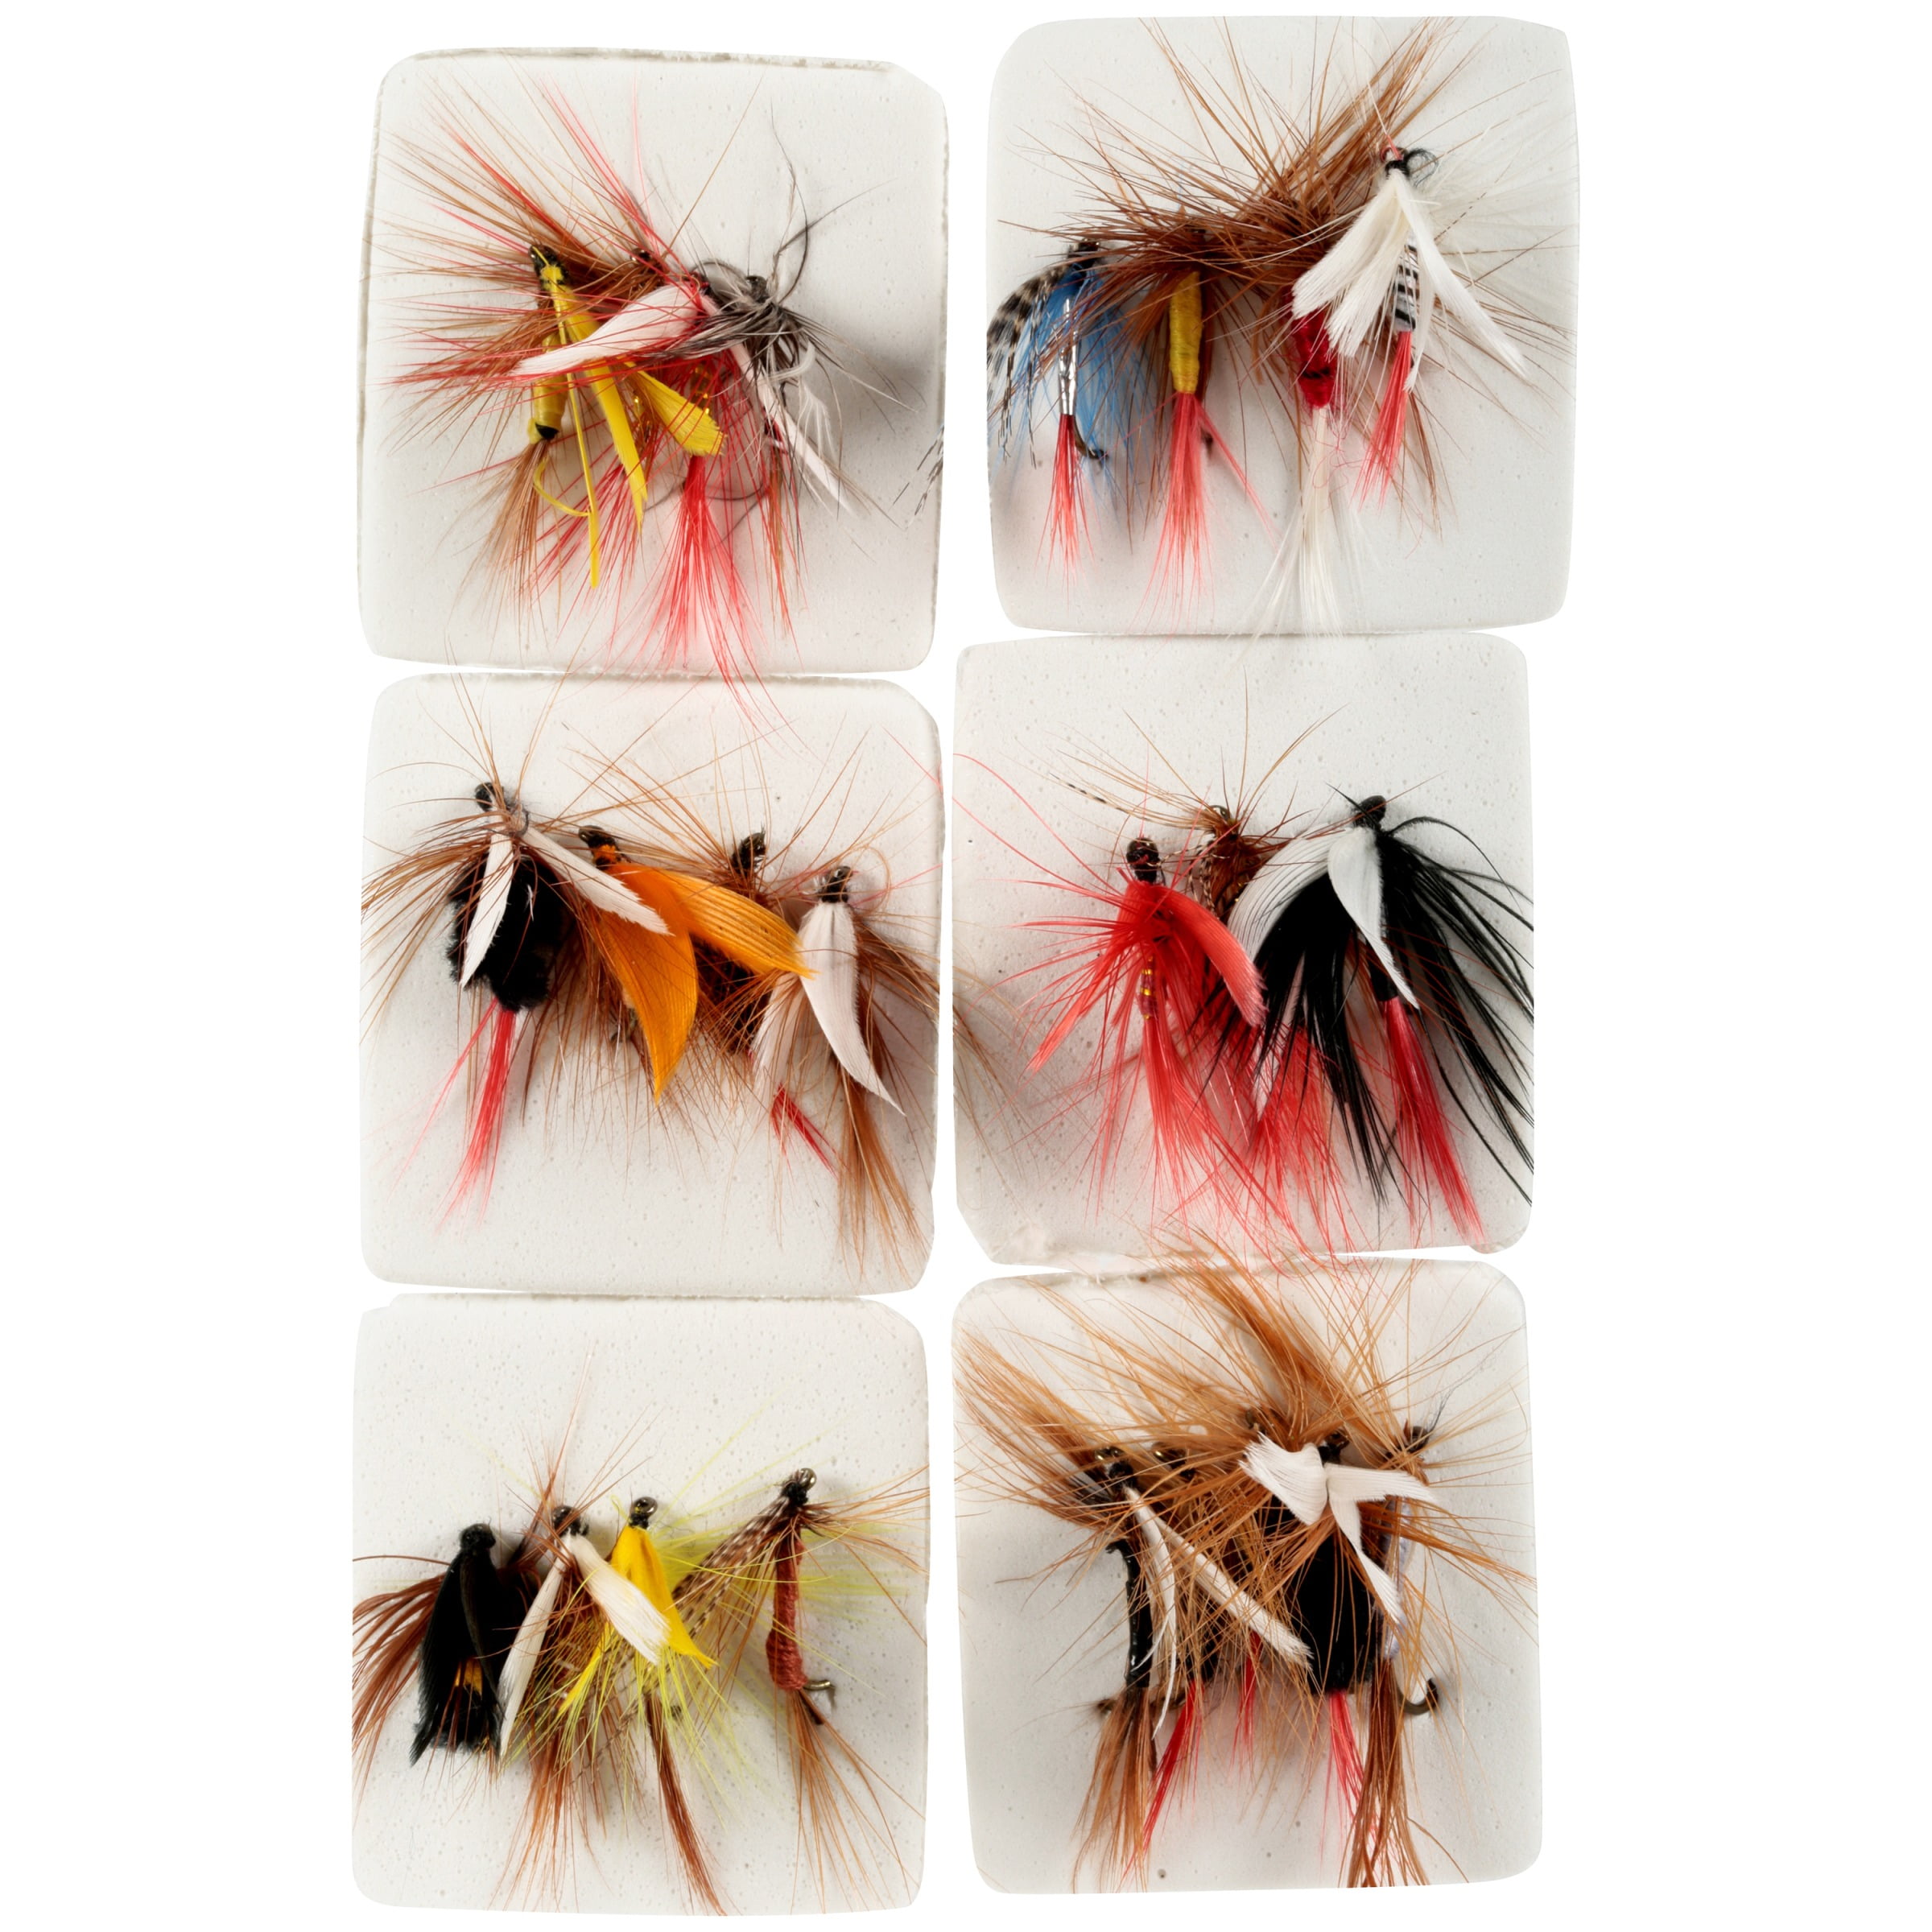 South Bend Assorted Freshwater Flies Trout Fishing Lure Kit, Multi